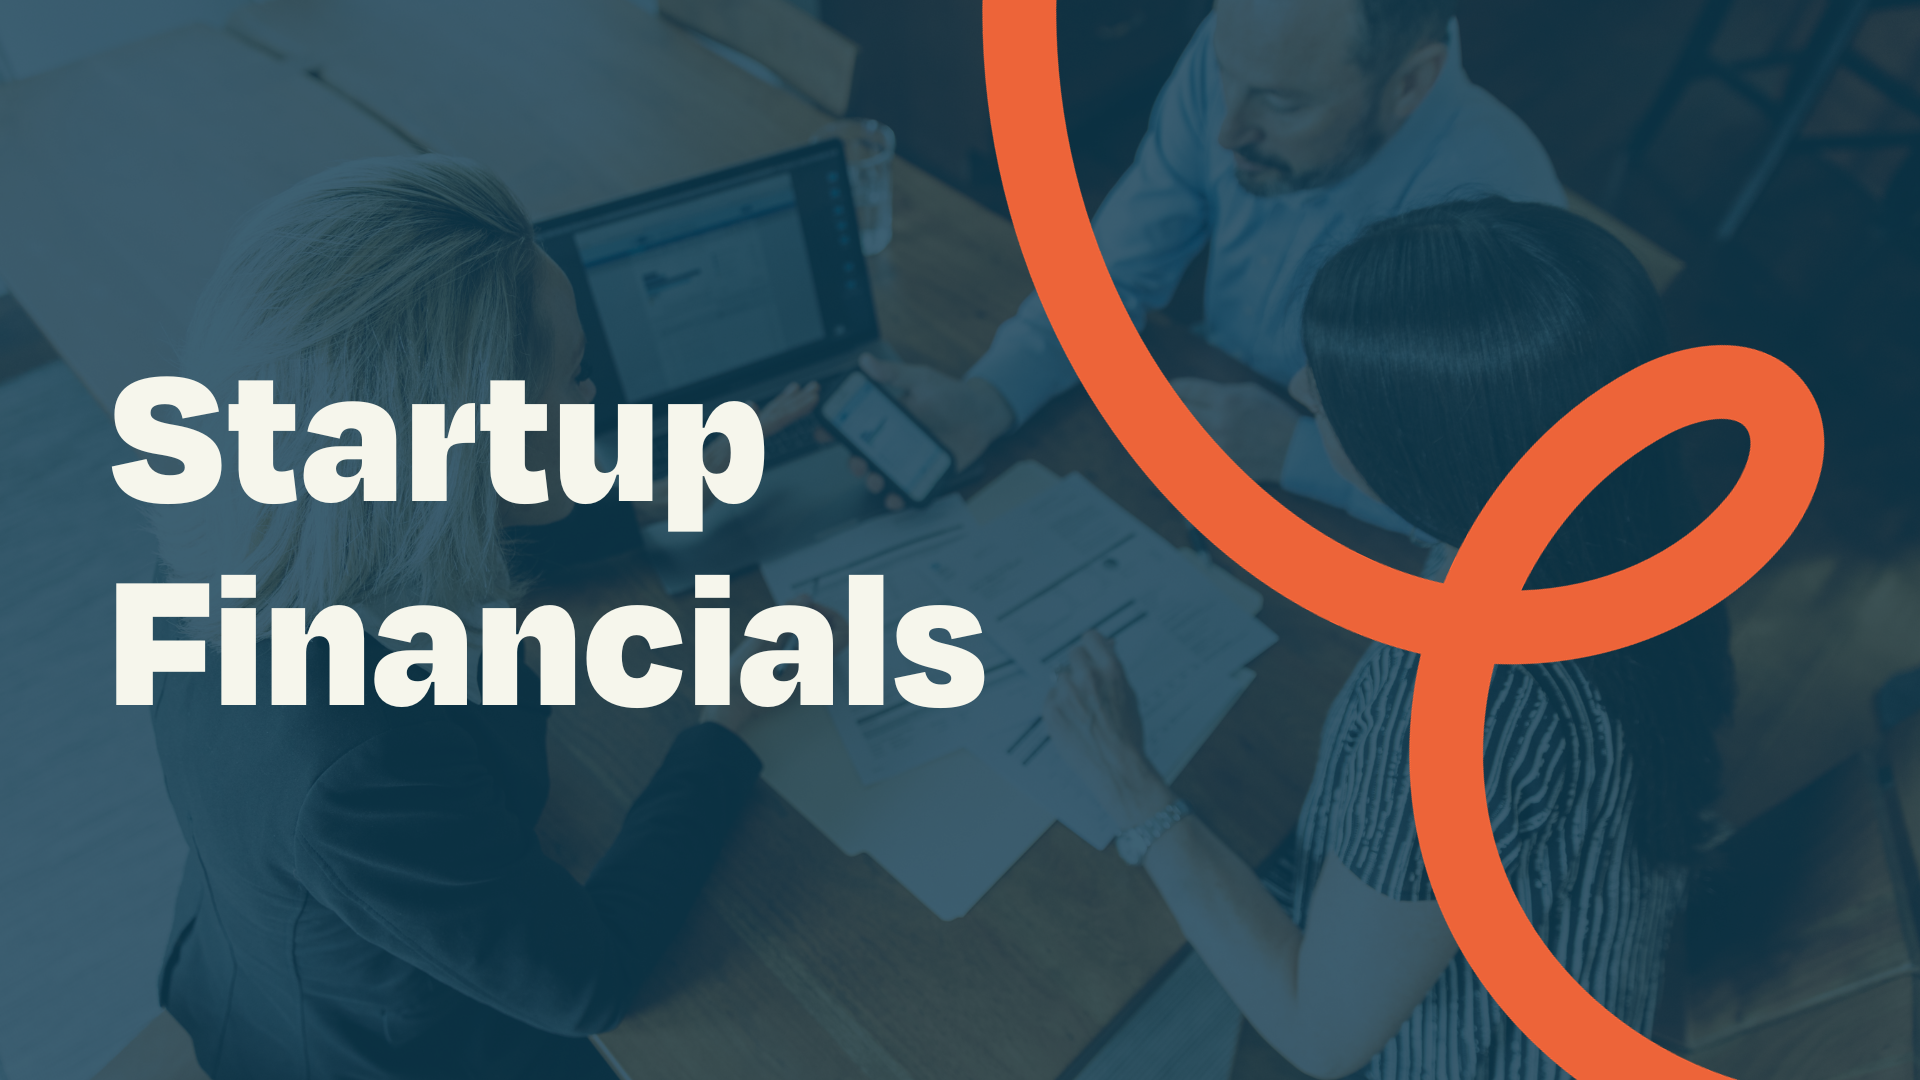 Startup Financials: Strategies, Tips, and Tools for Success